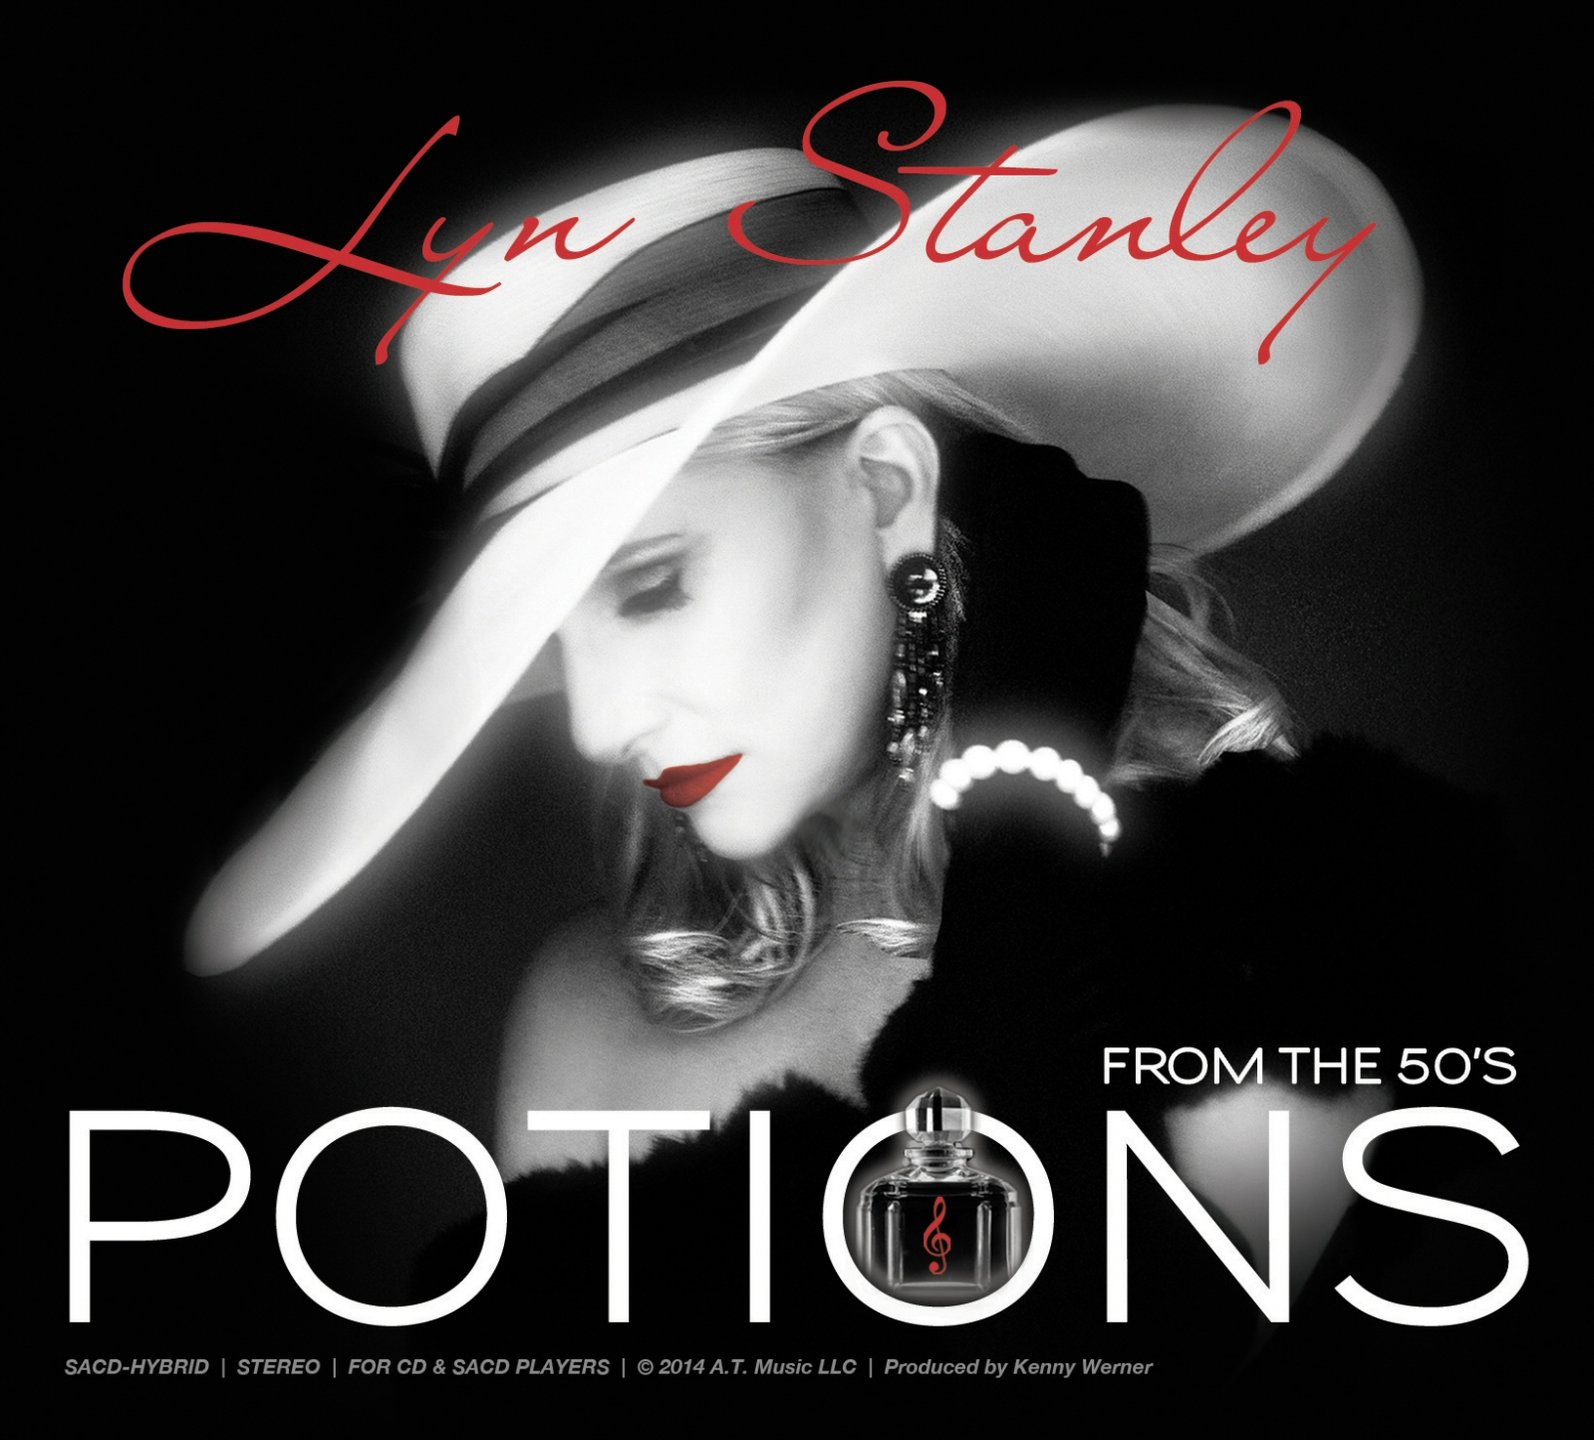 Lyn Stanley - Potions- From The 50s.jpg